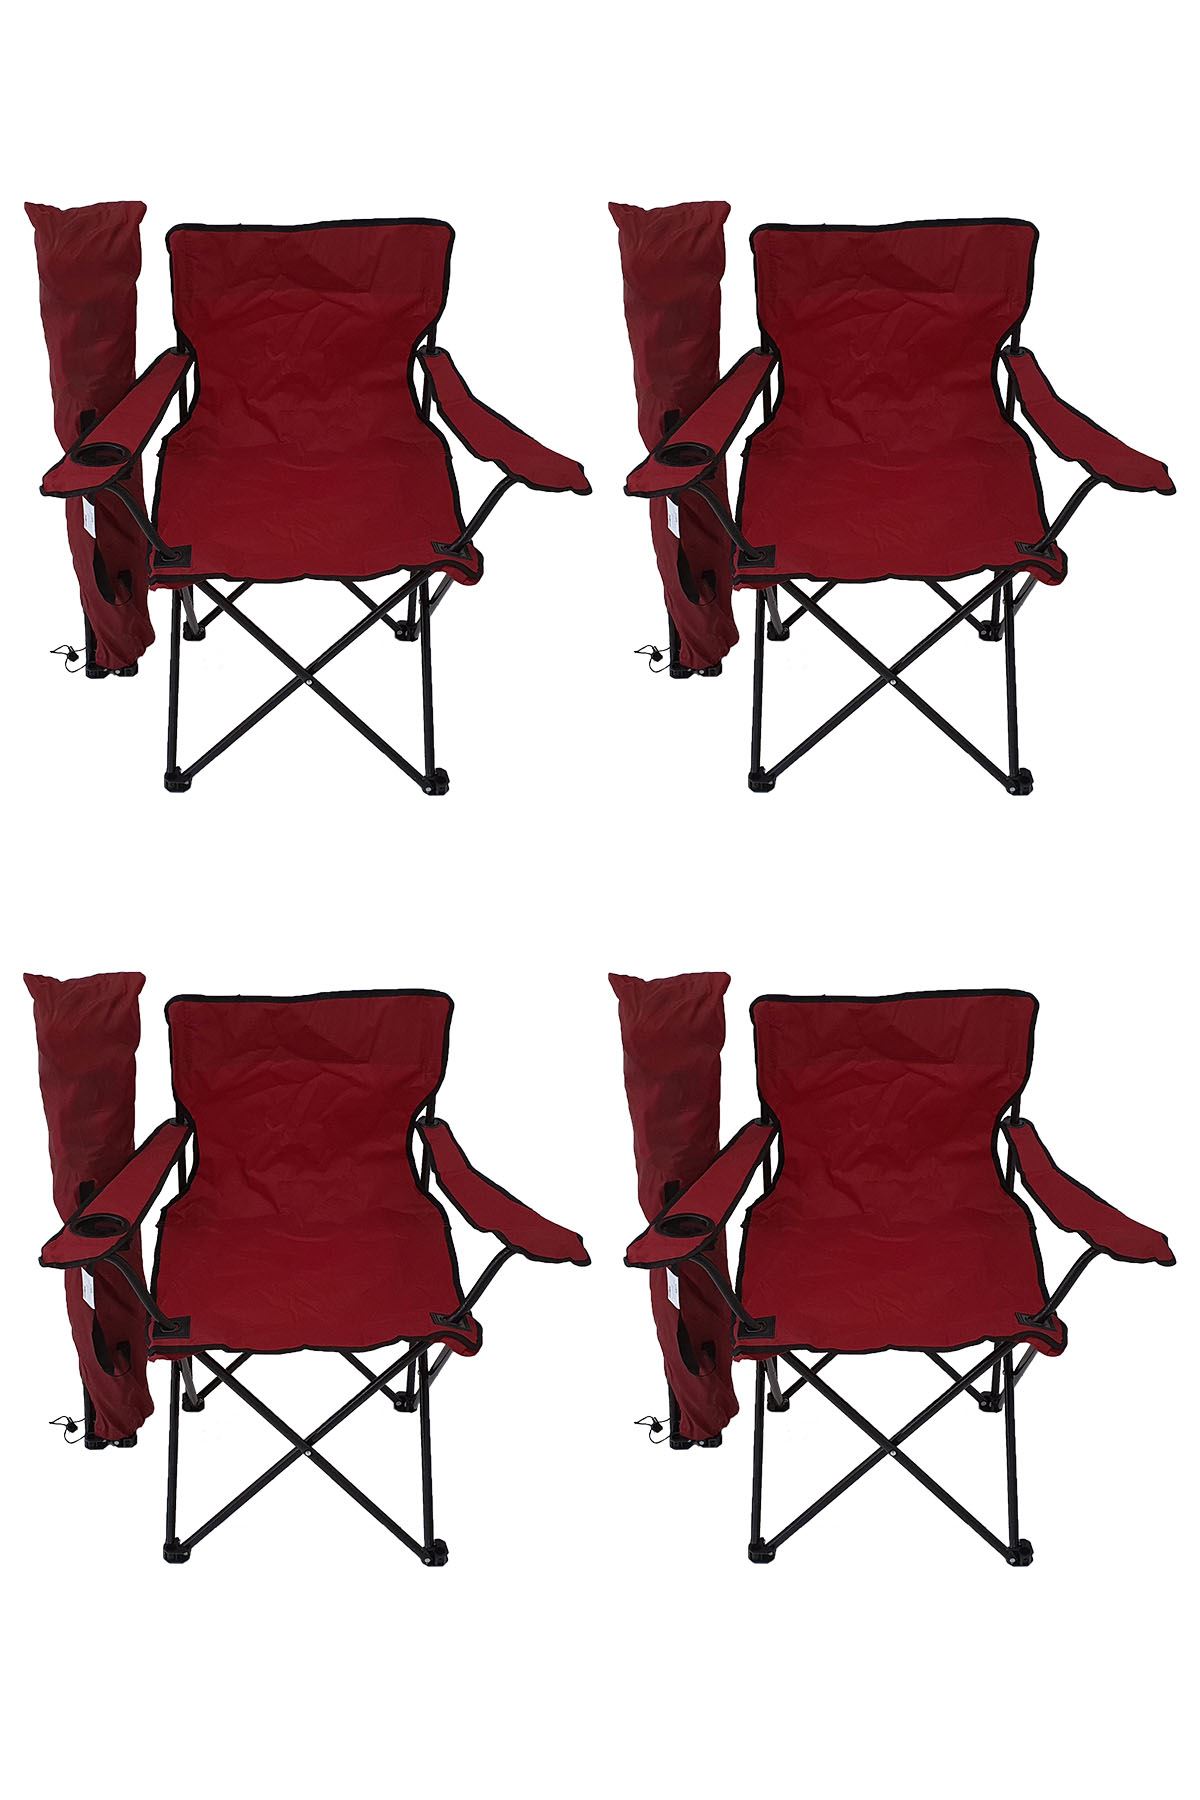 Bofigo 4 Pcs Camping Chair Picnic Chair Folding Chair Camping Chair with Carrying Bag Red